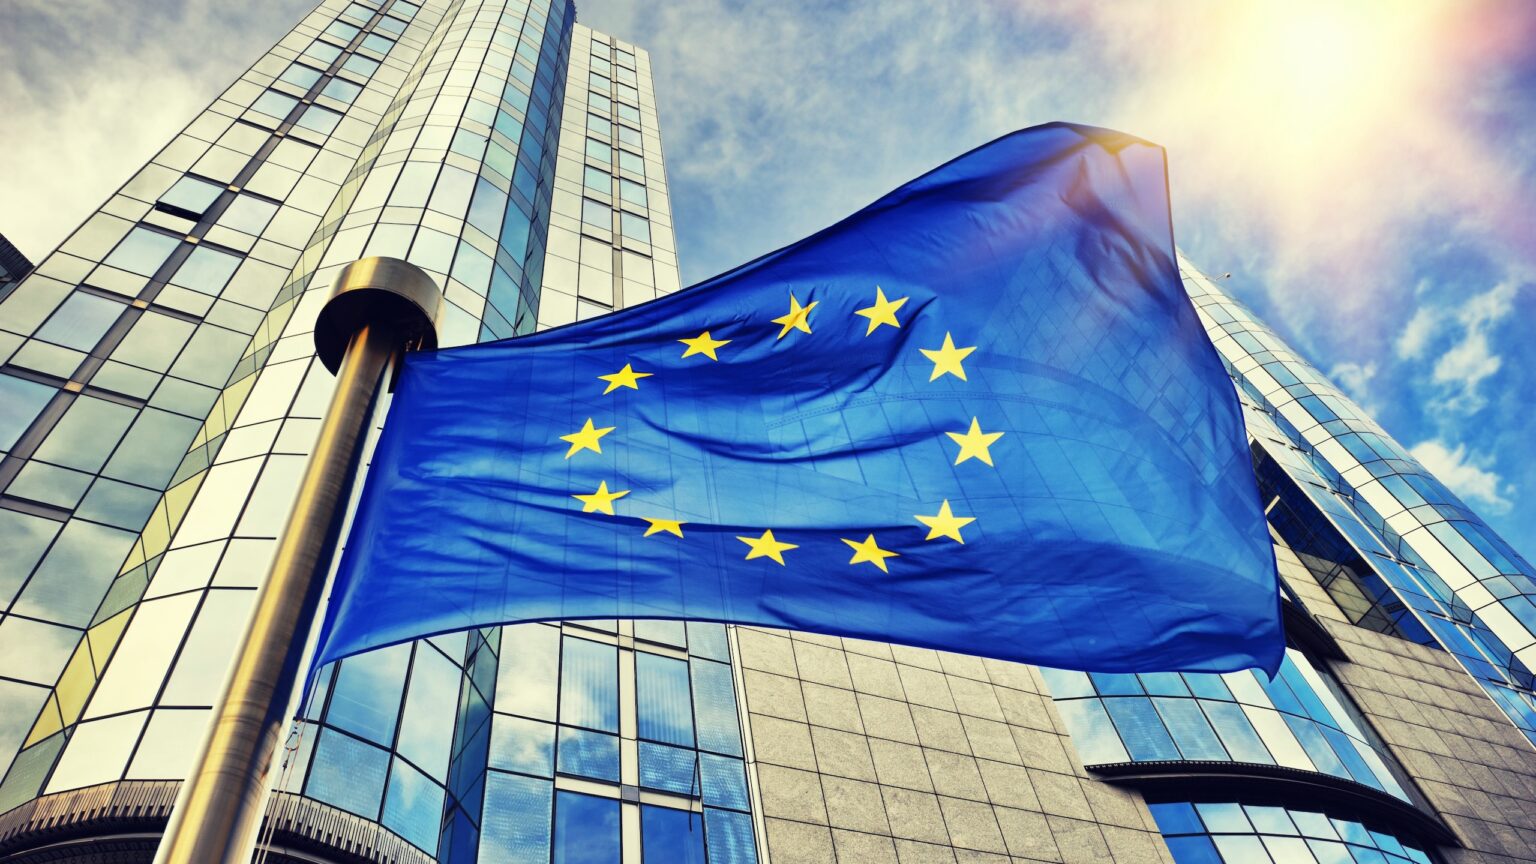 EU Council Adopts New Crypto Rules to Prevent Money Laundering